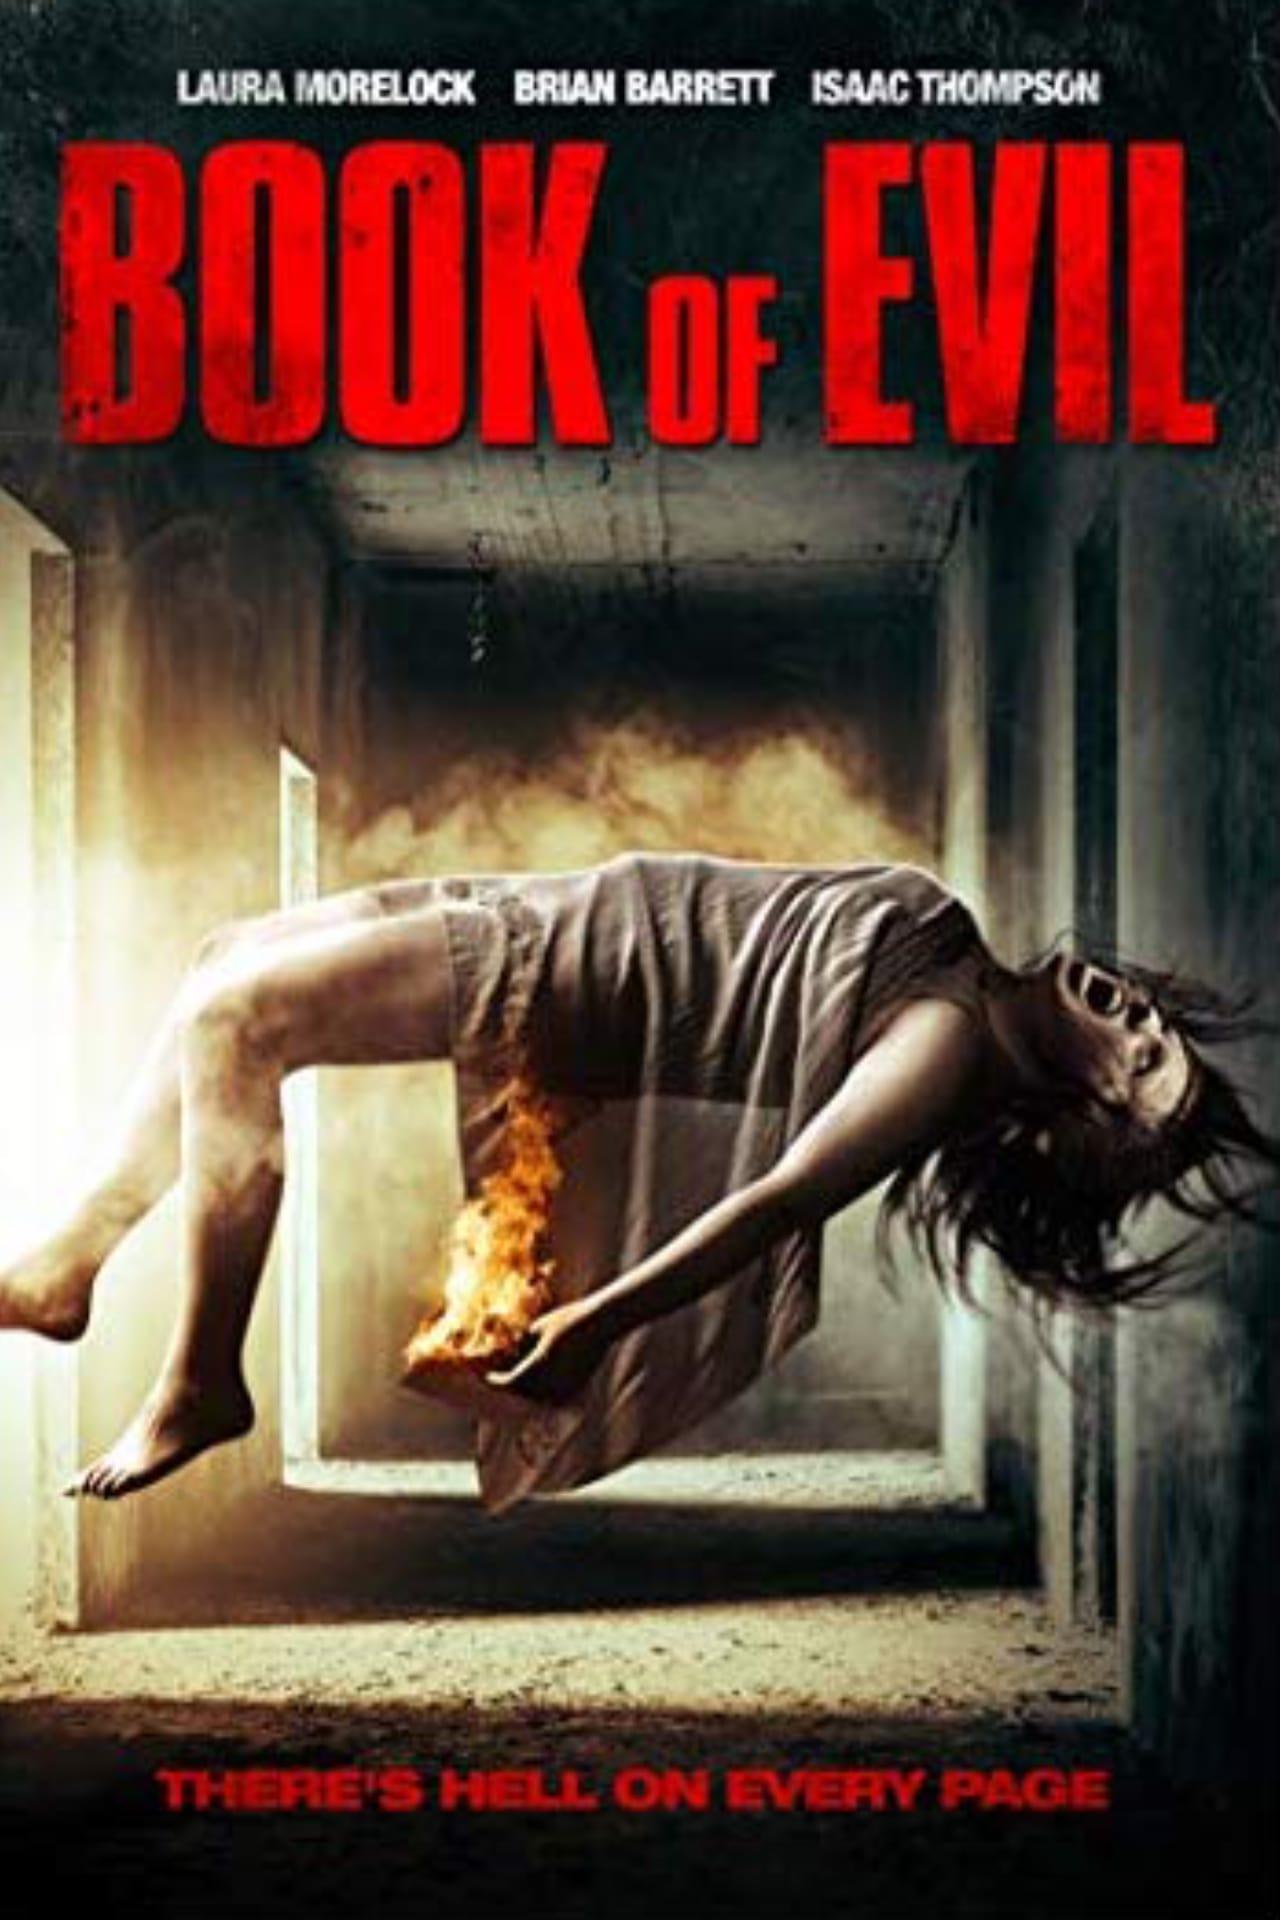 Book of Evil poster